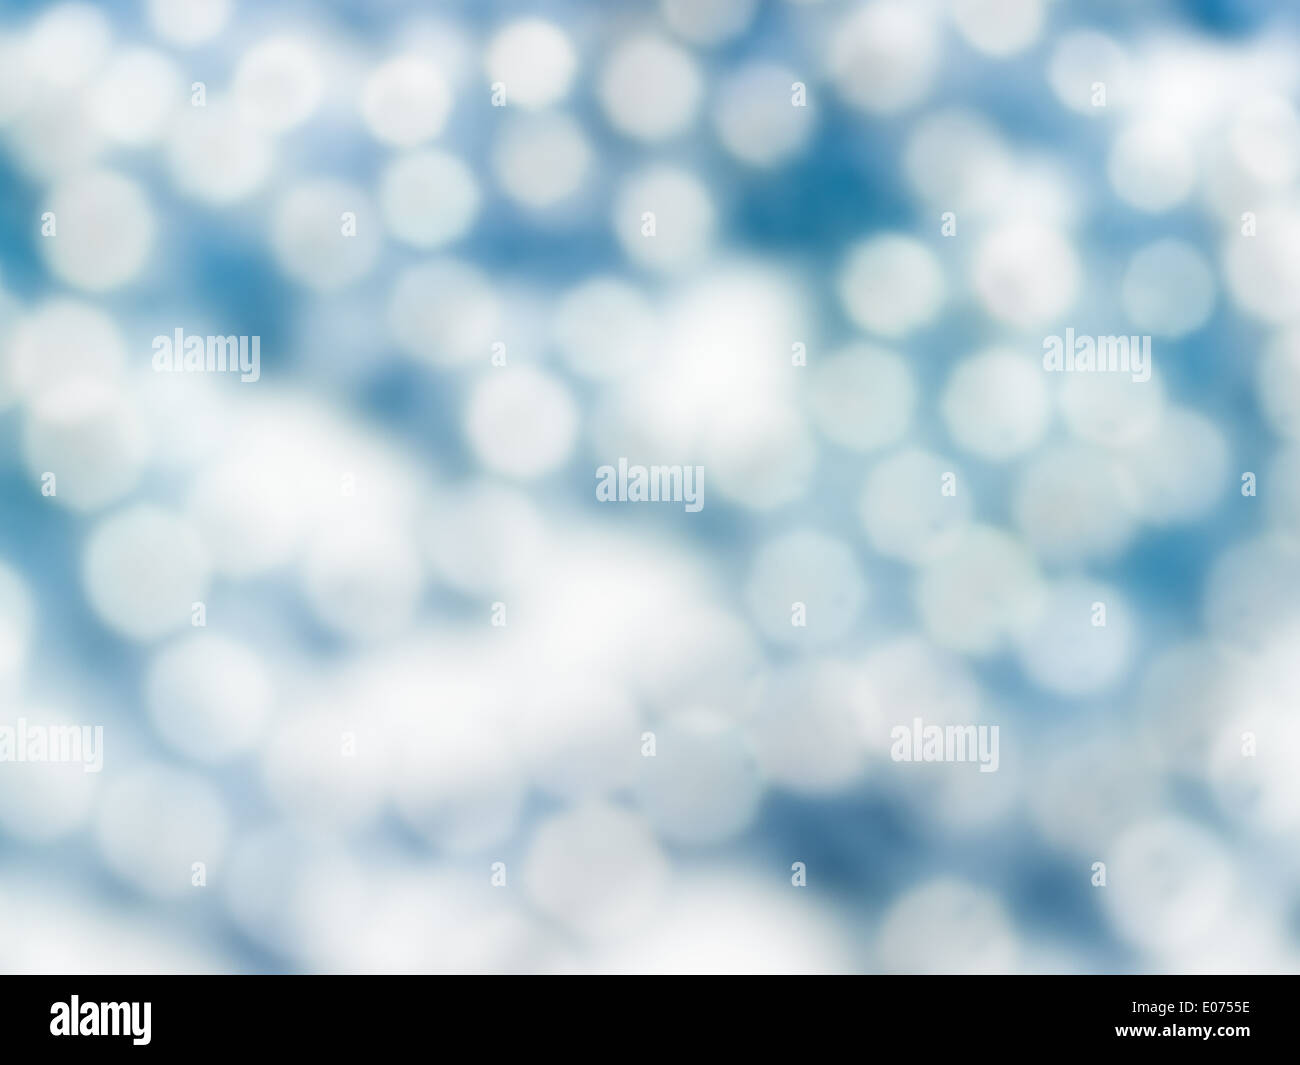 Abstract blue shiny blurred out of focus background texture Stock Photo